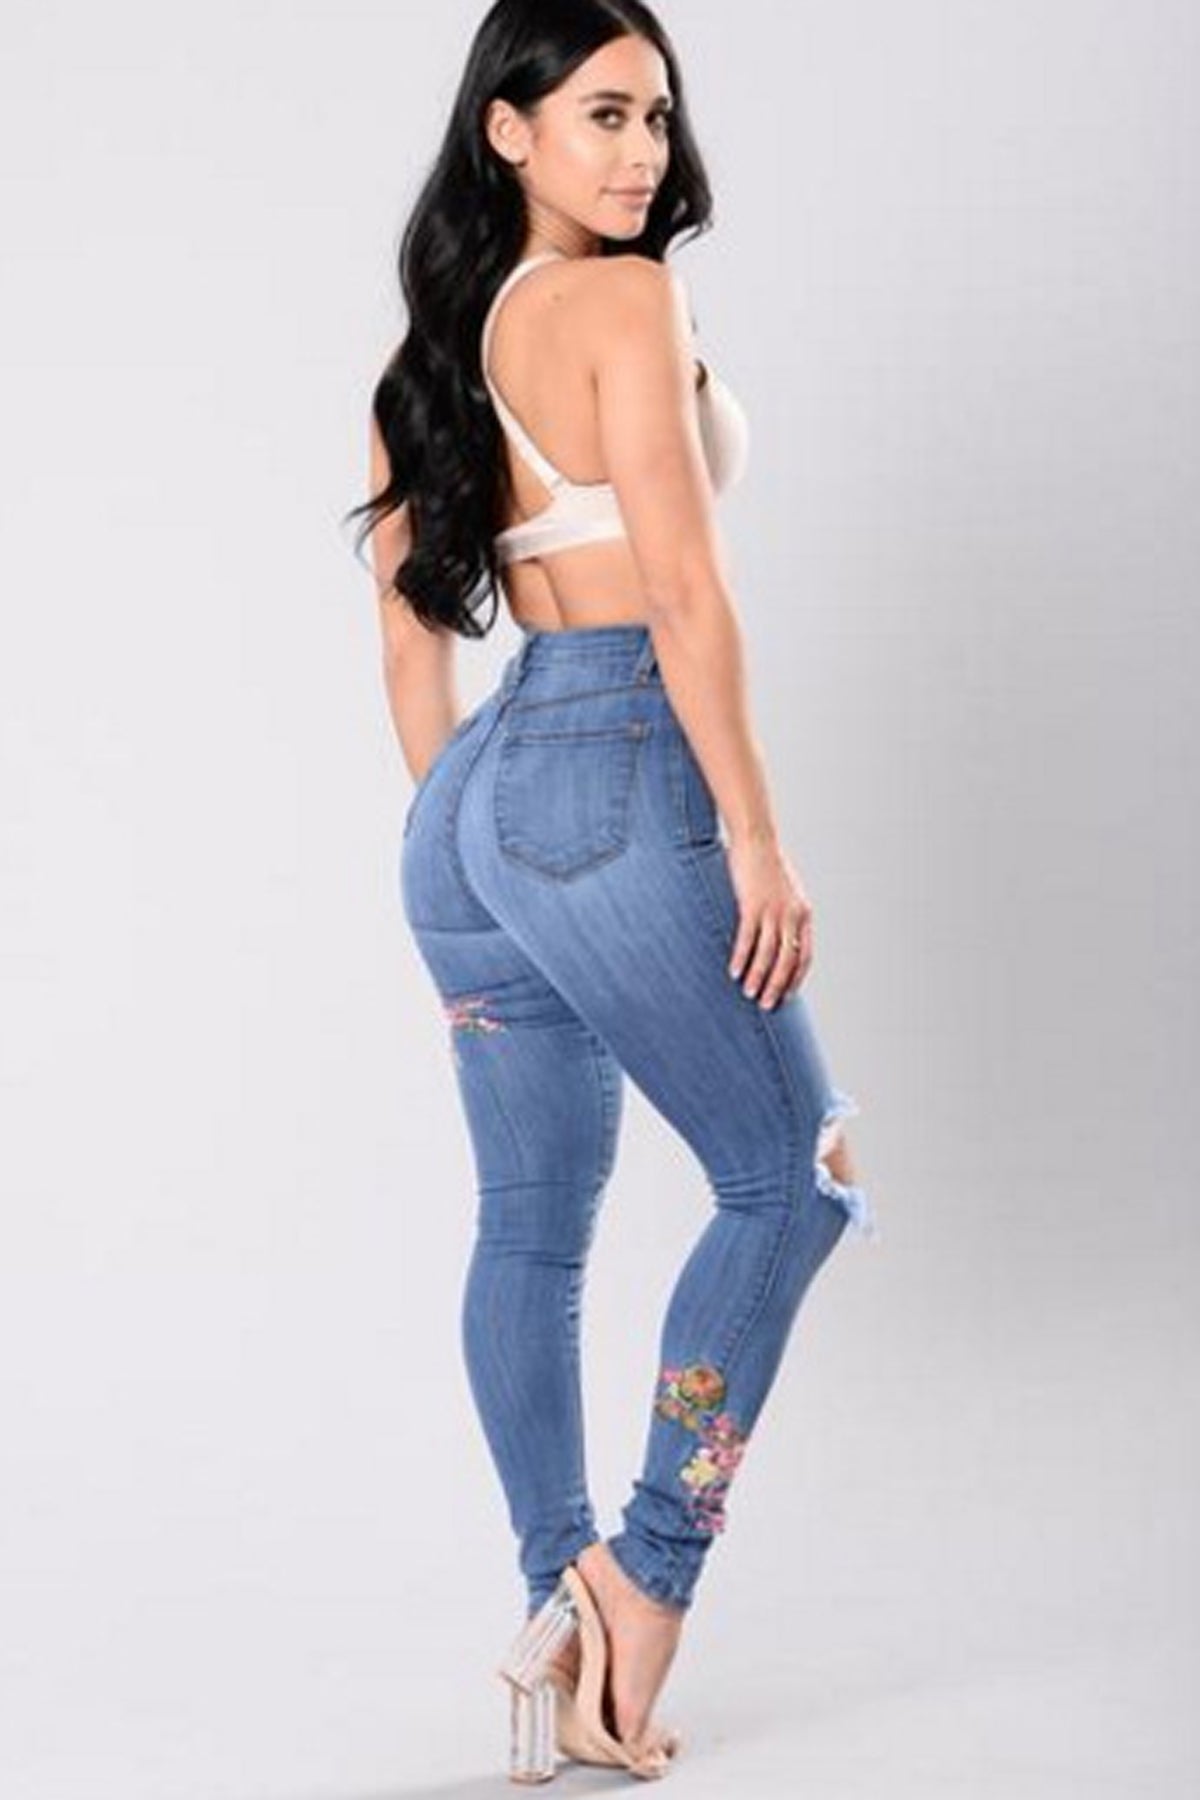 Flower Embroidery Middle Waist Cut Out Holes Long Skinny Jeans